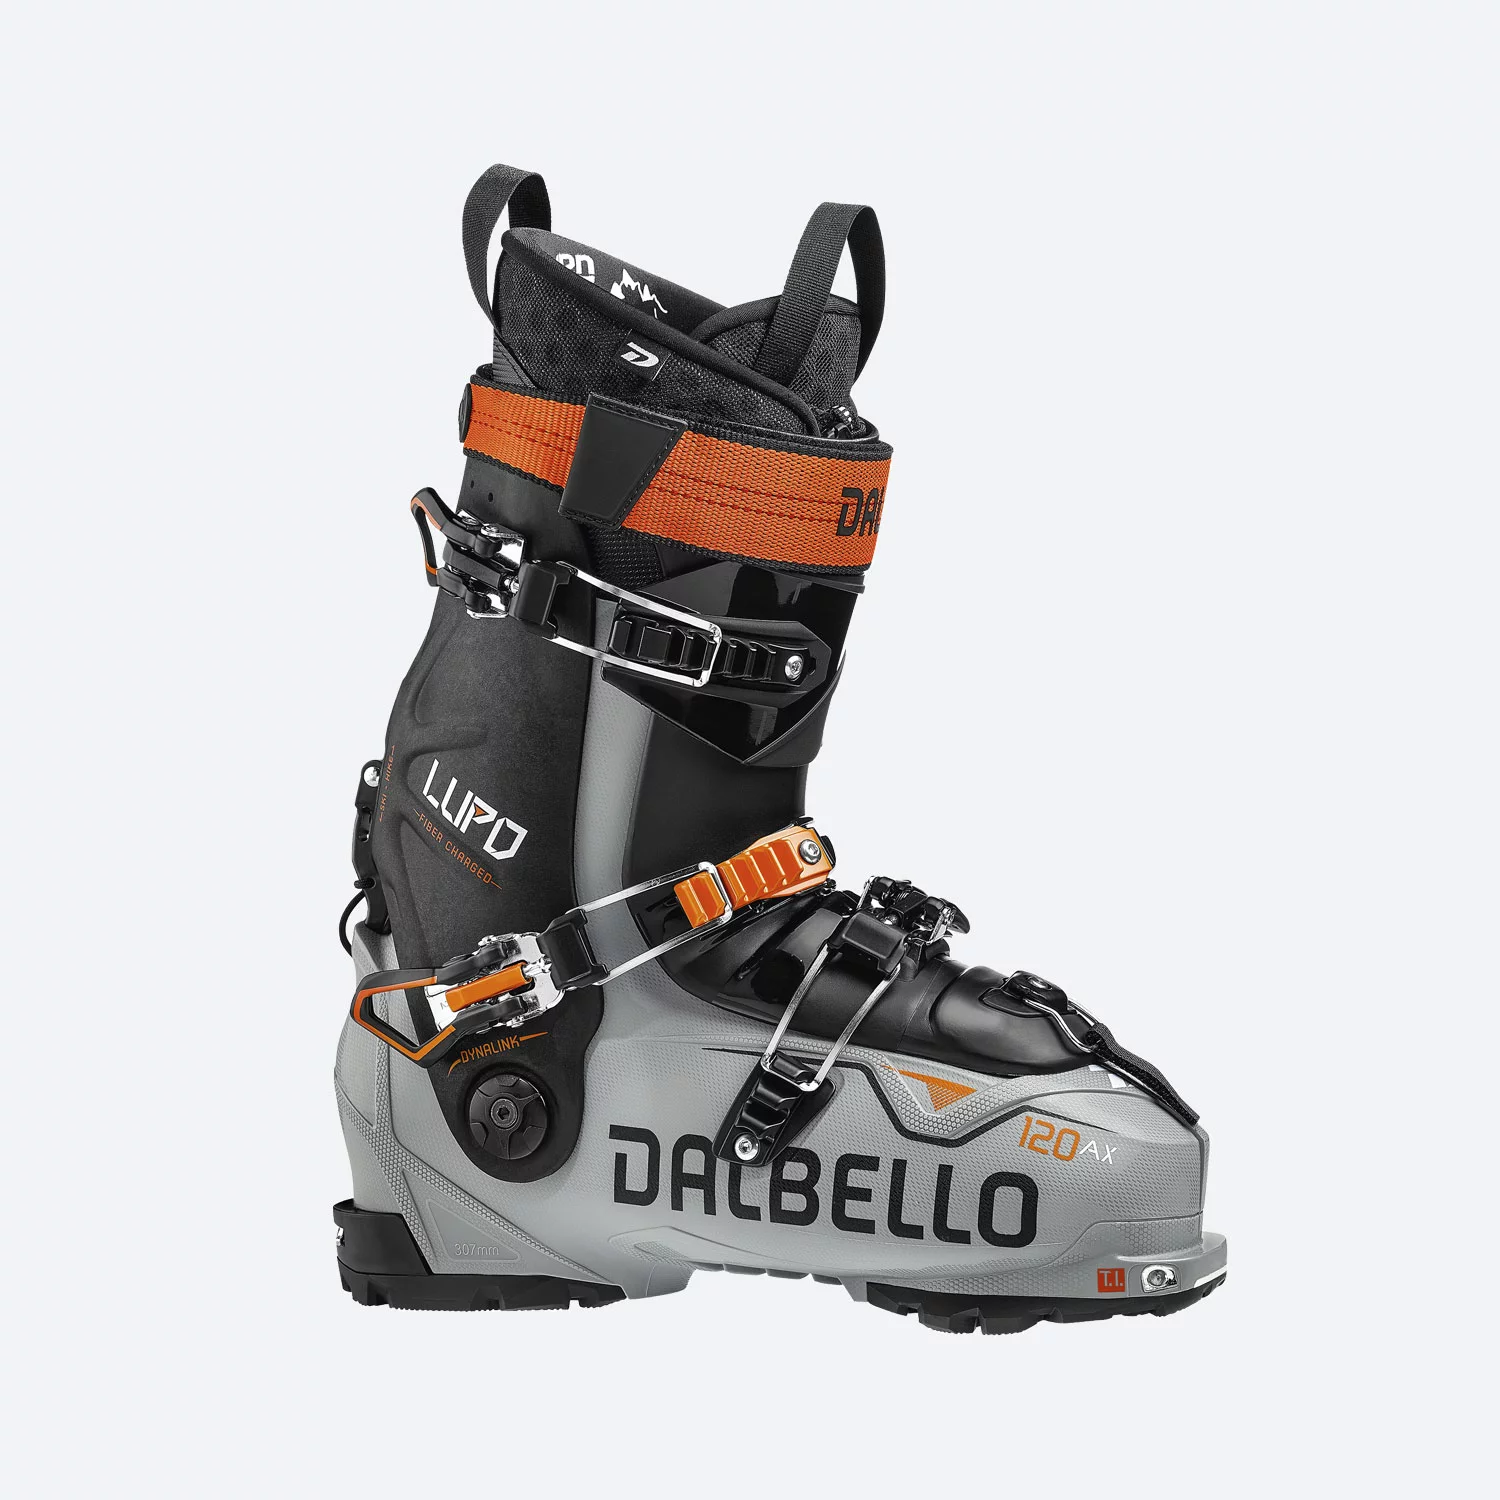 Image 0 of DALBELLO - LUPO AX 120 BOOTS, 275 only - 2022